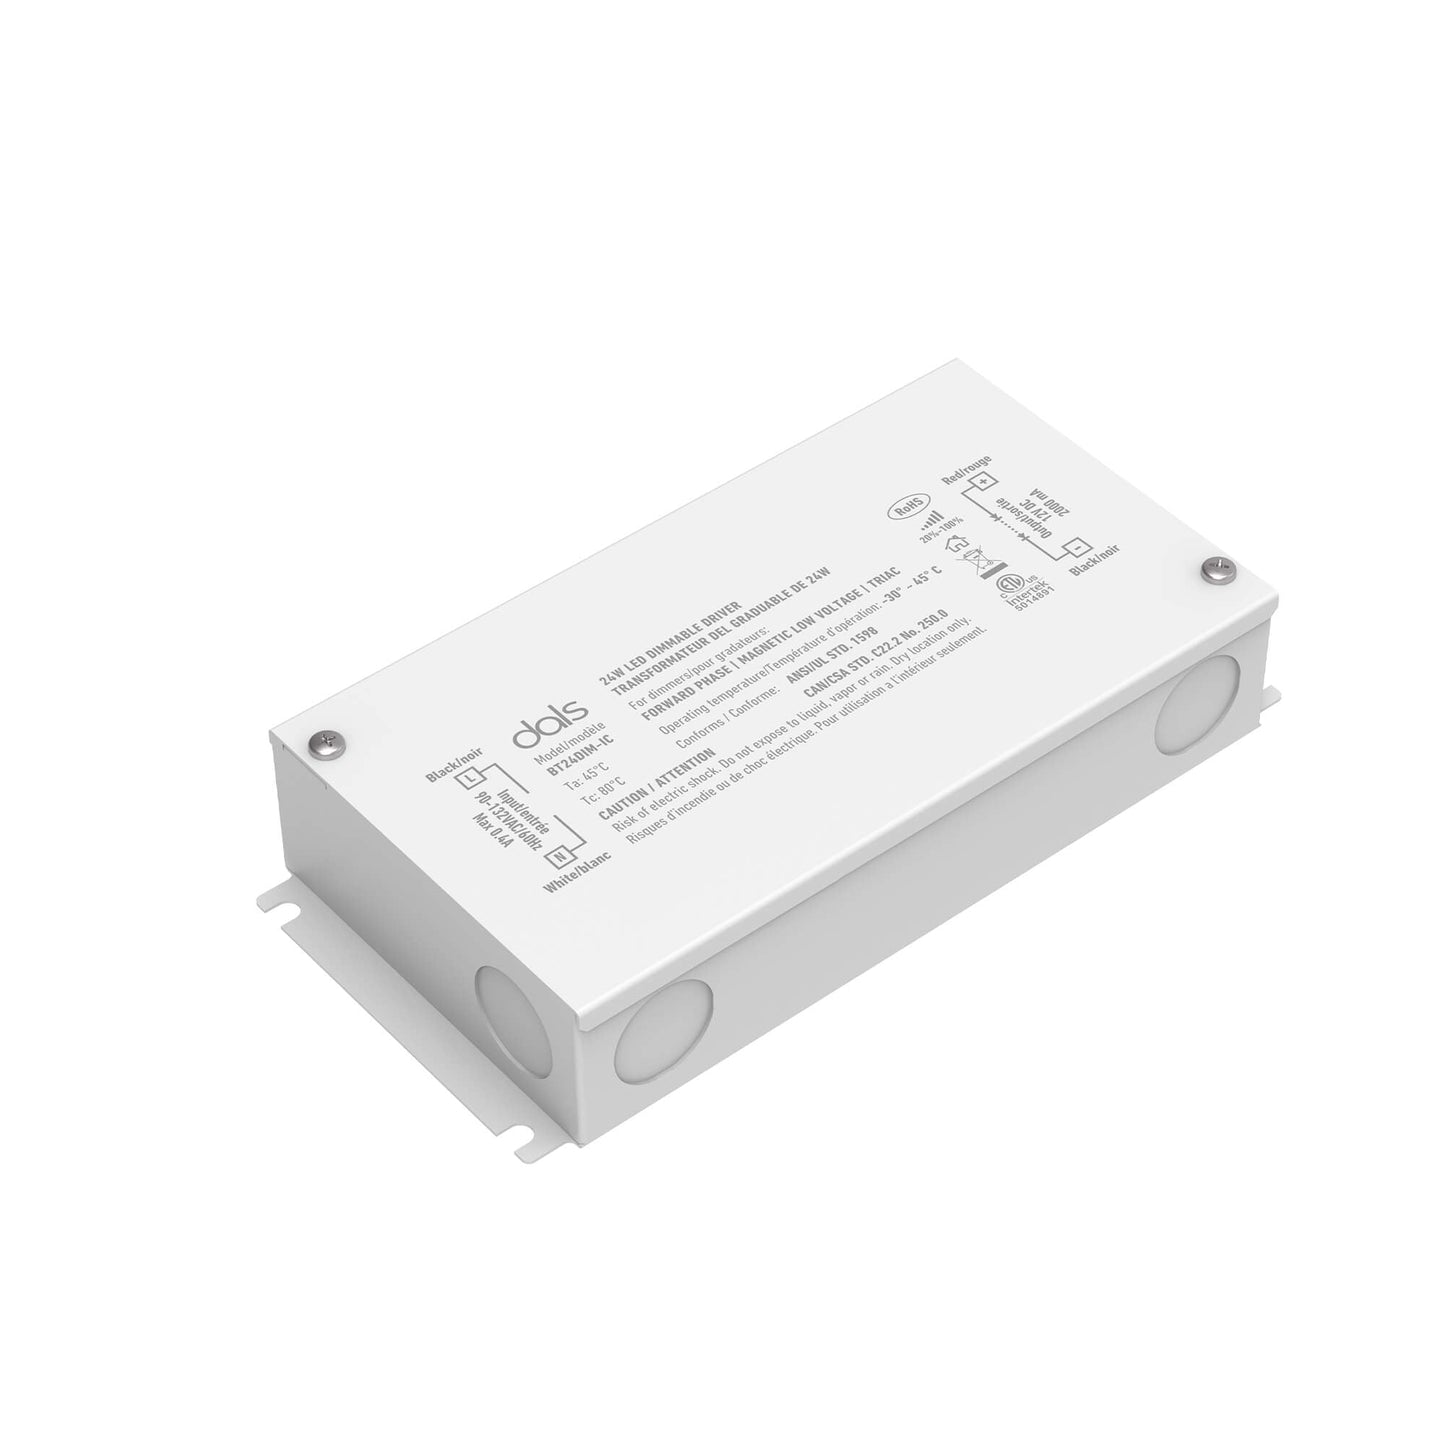 DALS-BT24DIM-ICDals Lighting BTXXDIM-IC 12VDC Dimmable LED Driver